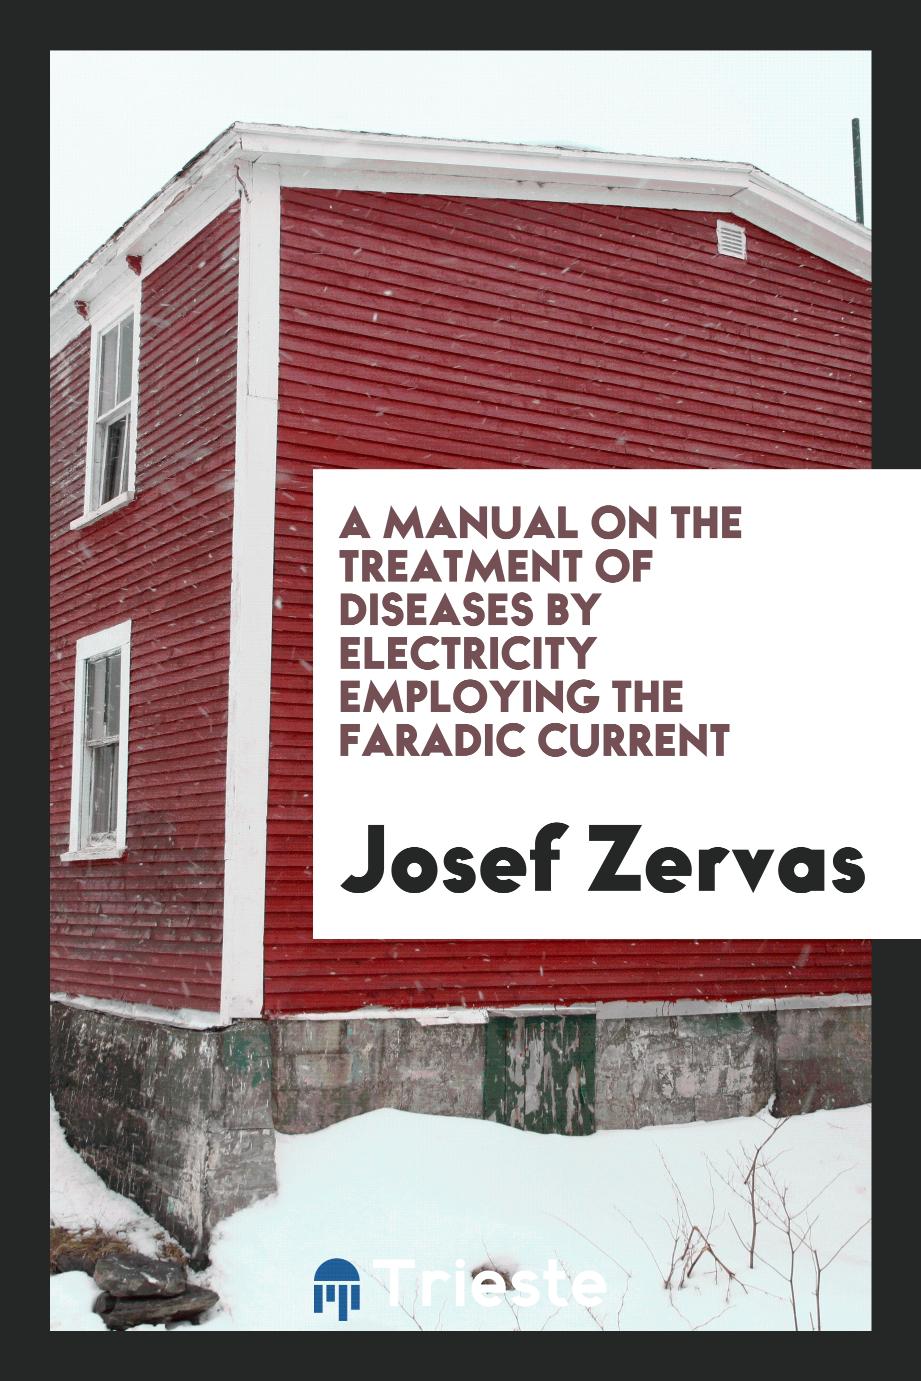 A Manual on the treatment of diseases by electricity employing the Faradic current